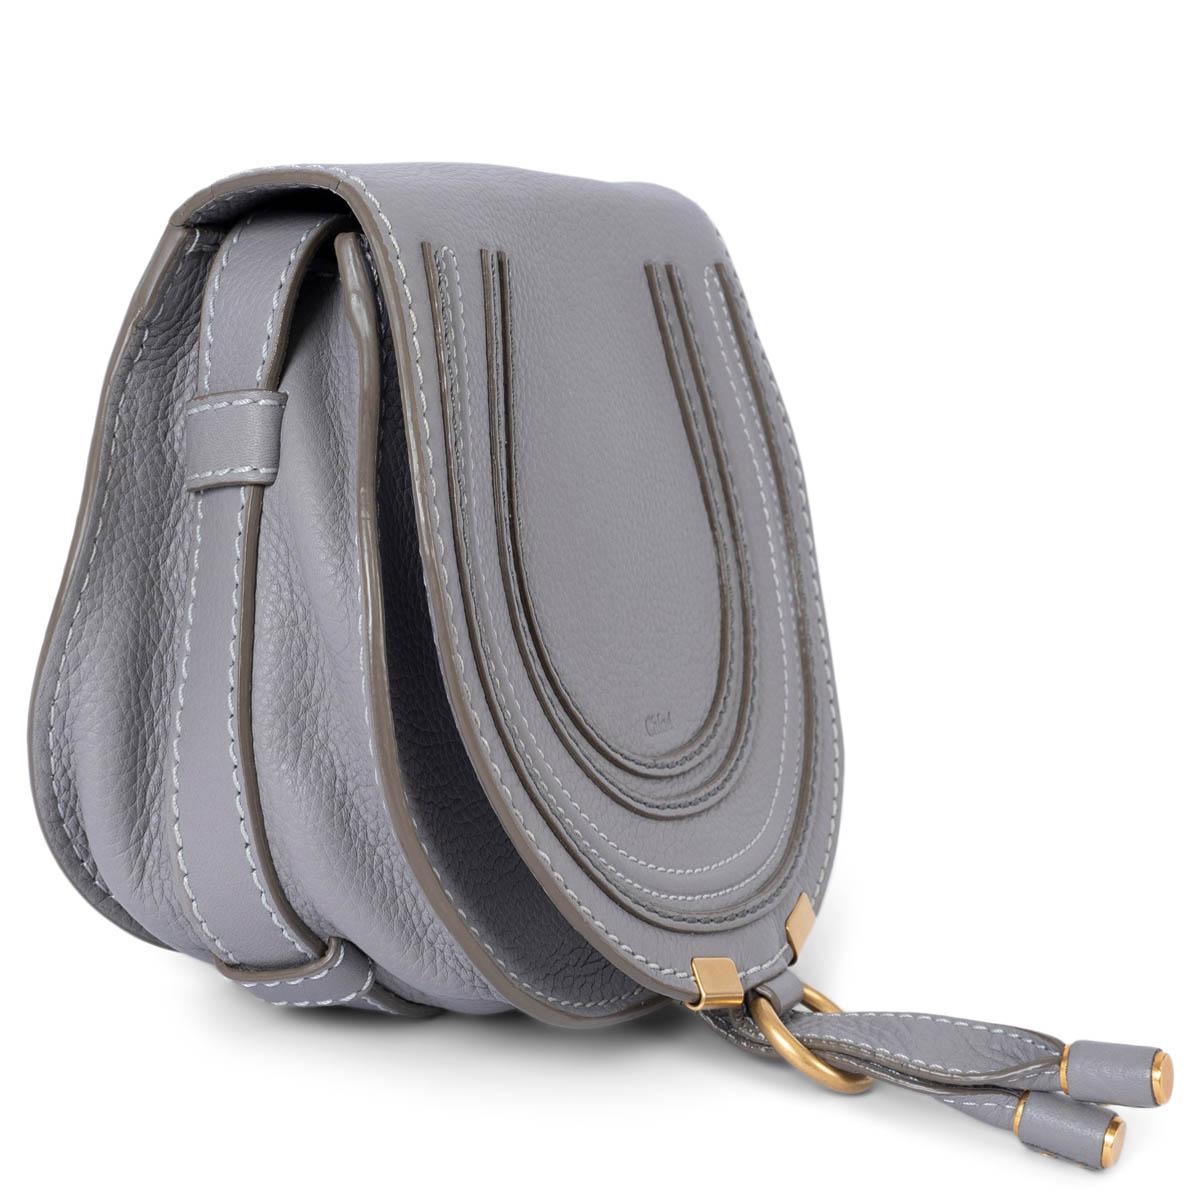 100% authentic Chloé Marcie Mini shoulder bag in grey grained leather. The design features an adjustable shoulder-strap, slot-tab fastening and is lined olive green canvas with an open pocket against the back. Has been carried and is in excellent